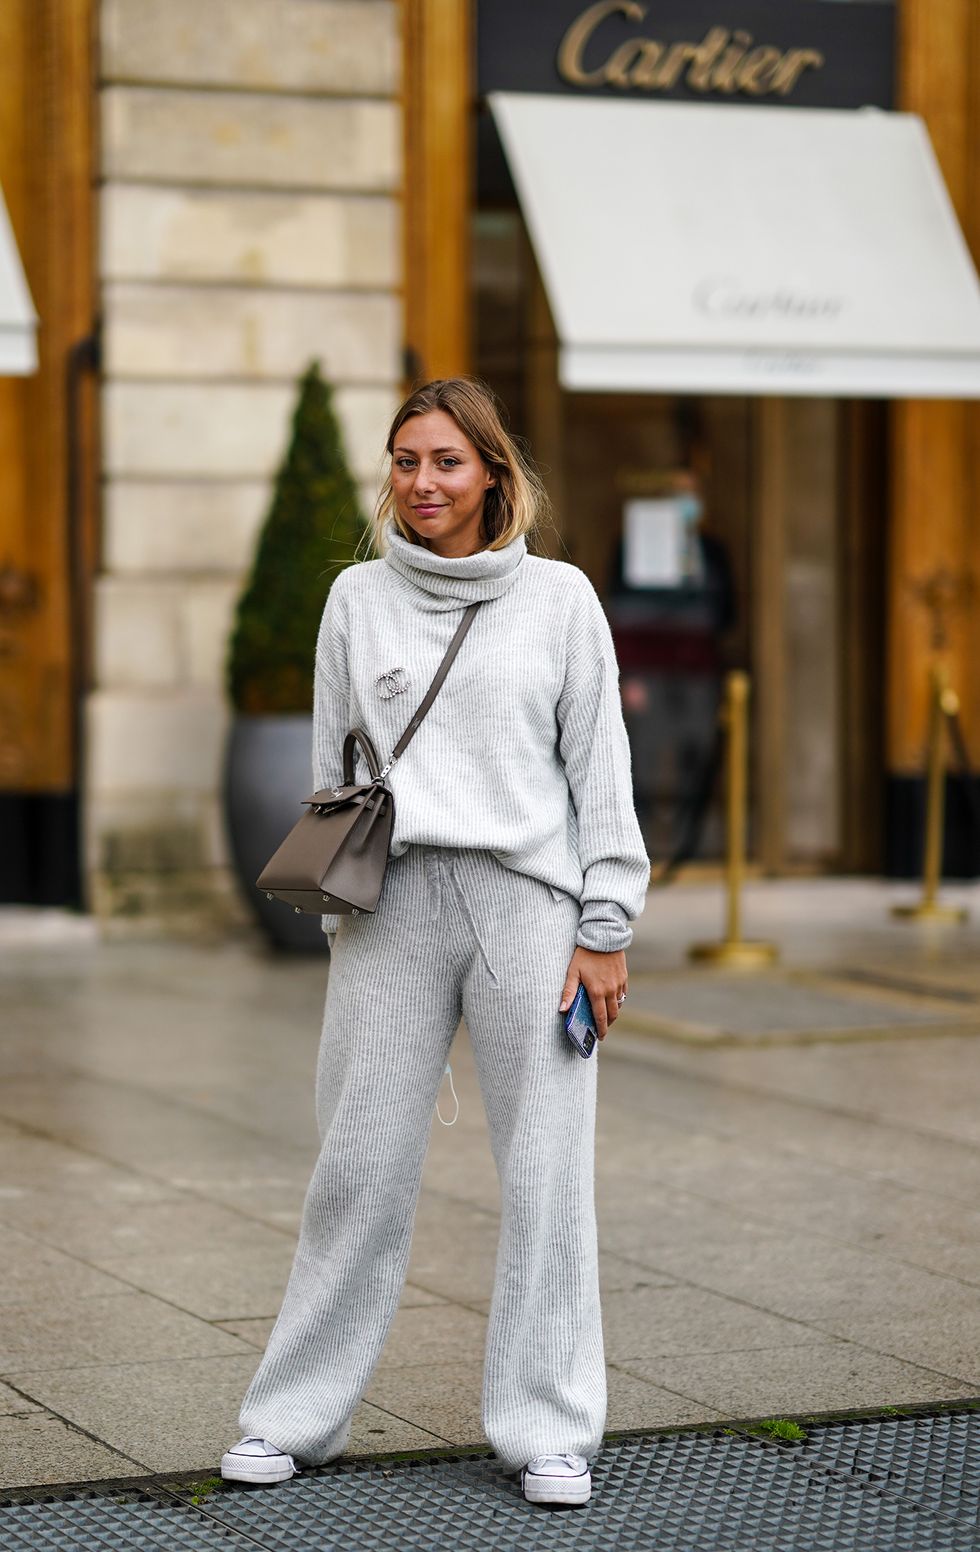 paris, france   september 29 diane perreau wears a gray wool turtleneck pullover, a chanel brooch, a brown leather hermes bag, flared pants, sneakers, during paris fashion week   womenswear spring summer 2021 on september 29, 2020 in paris, france photo by edward berthelotgetty images